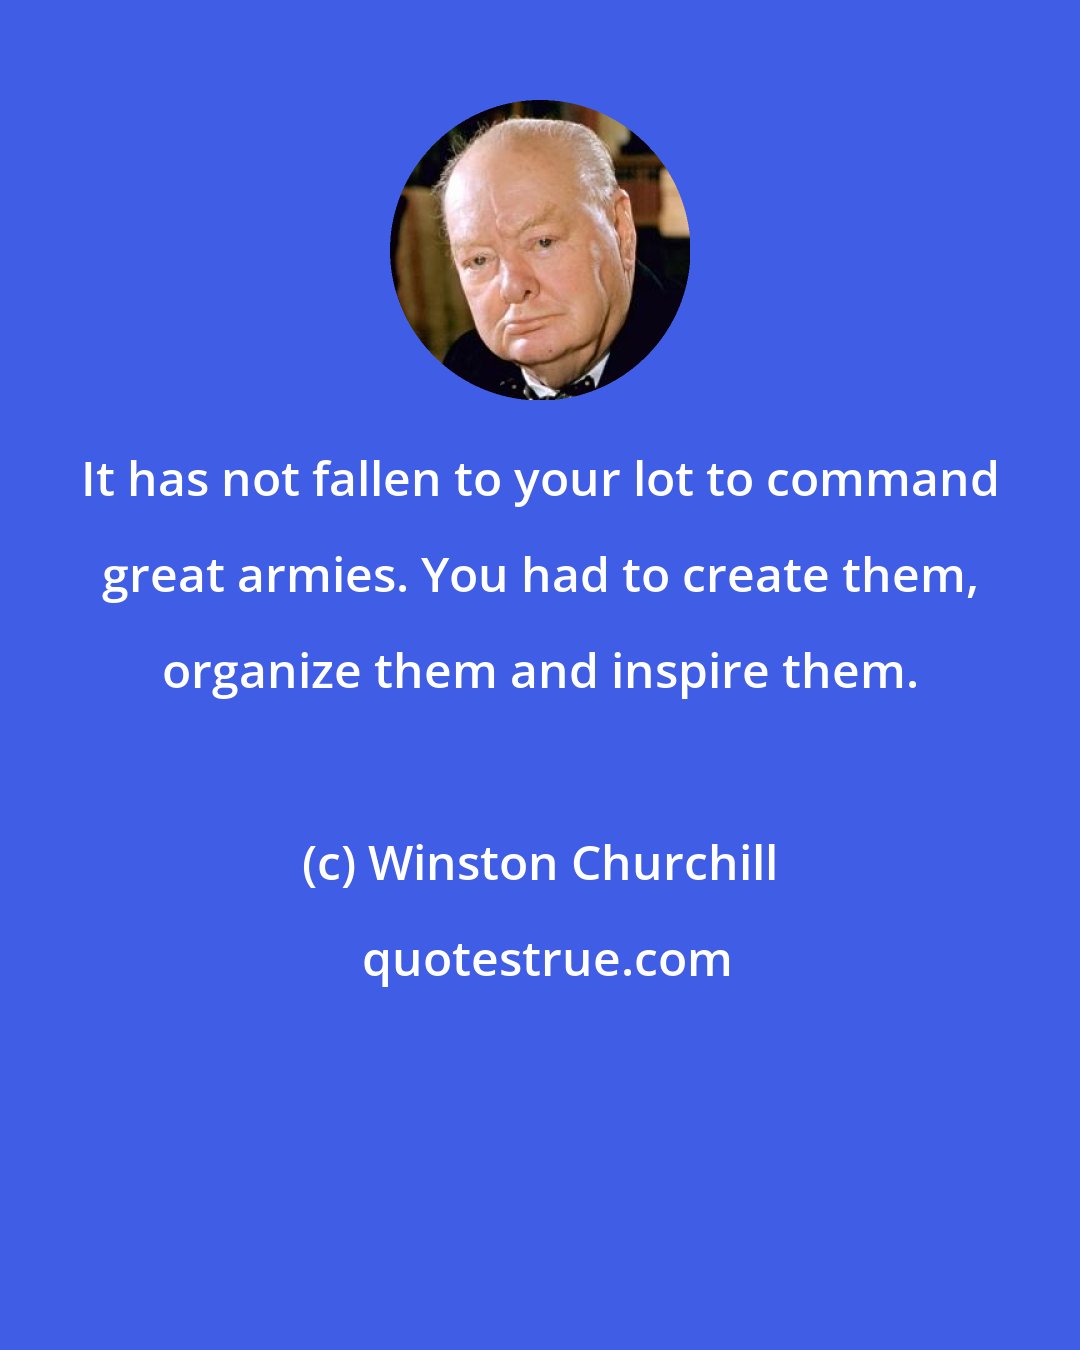 Winston Churchill: It has not fallen to your lot to command great armies. You had to create them, organize them and inspire them.